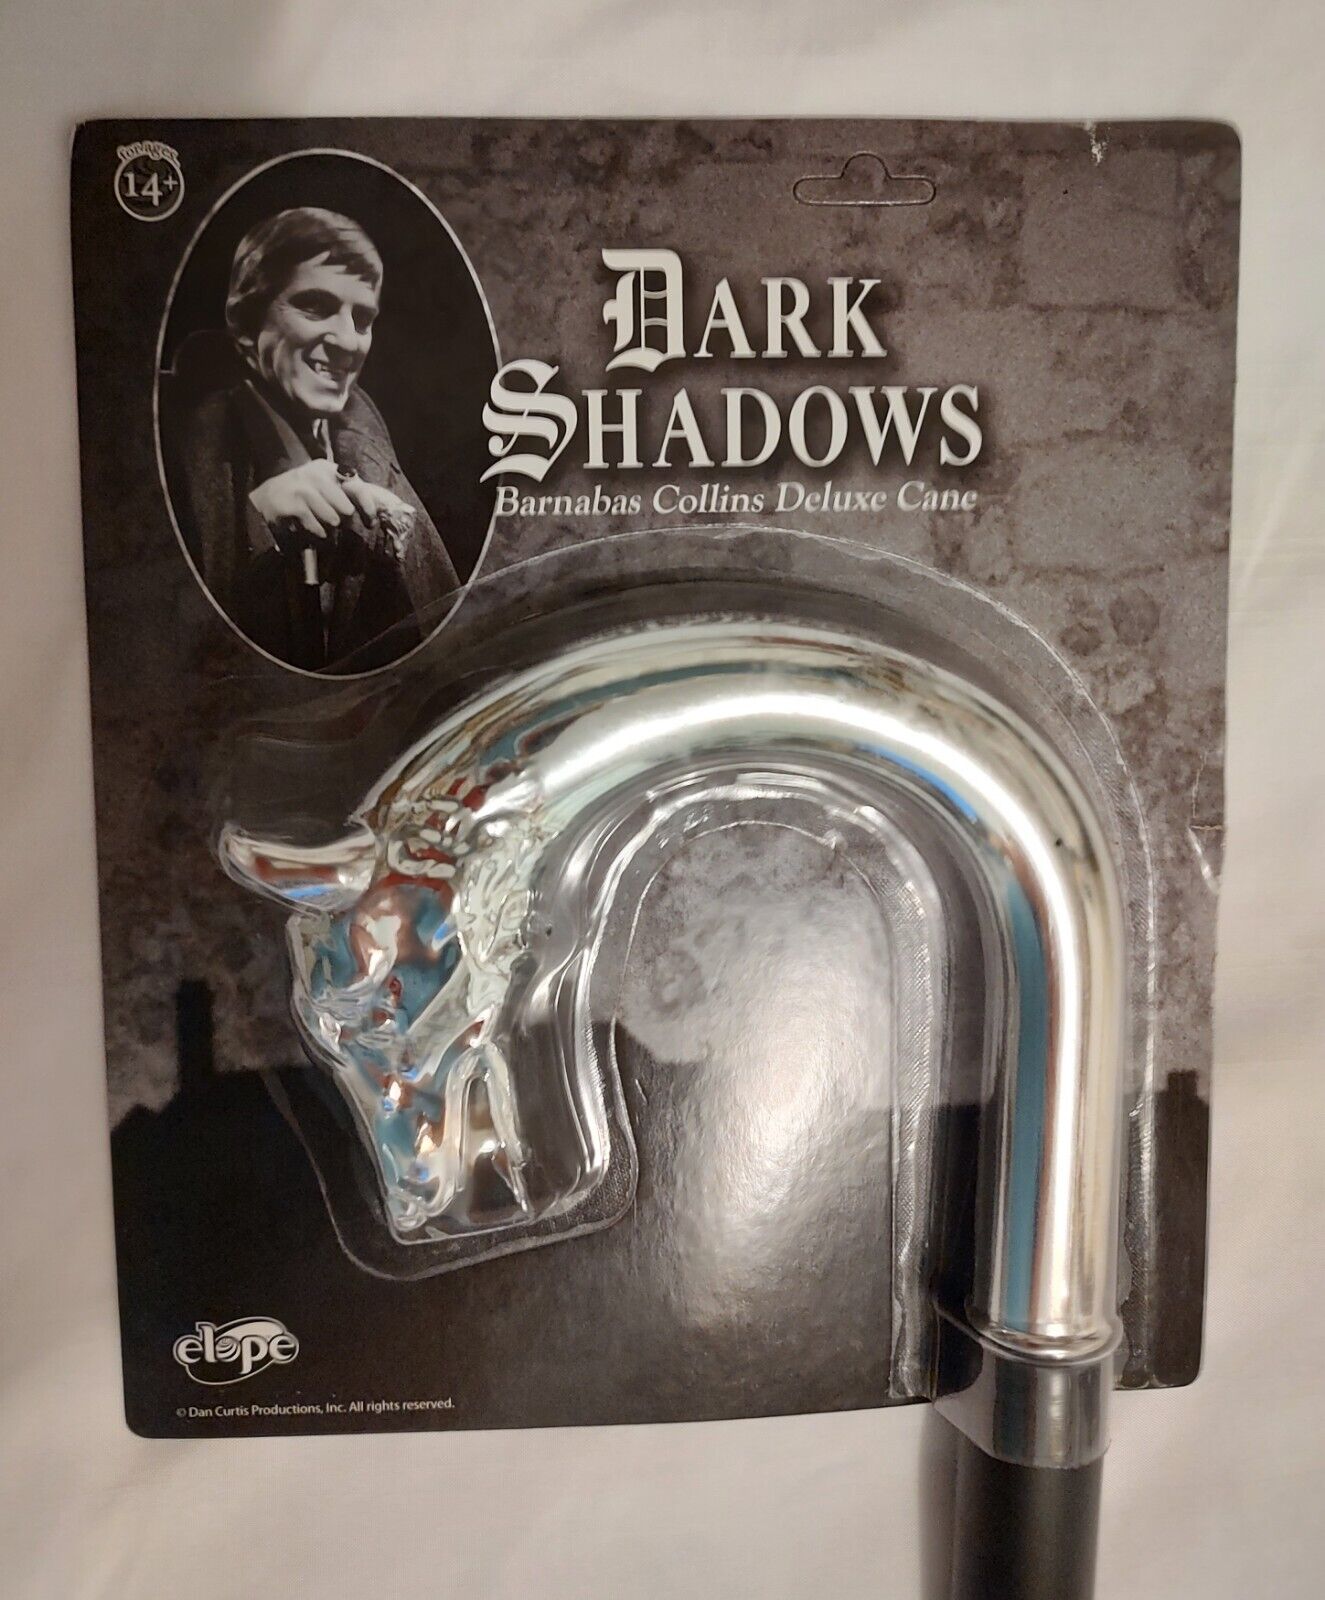 Barnabas Collins Deluxe Cane Elope Sealed On Header Card Dark Shadows Plastic